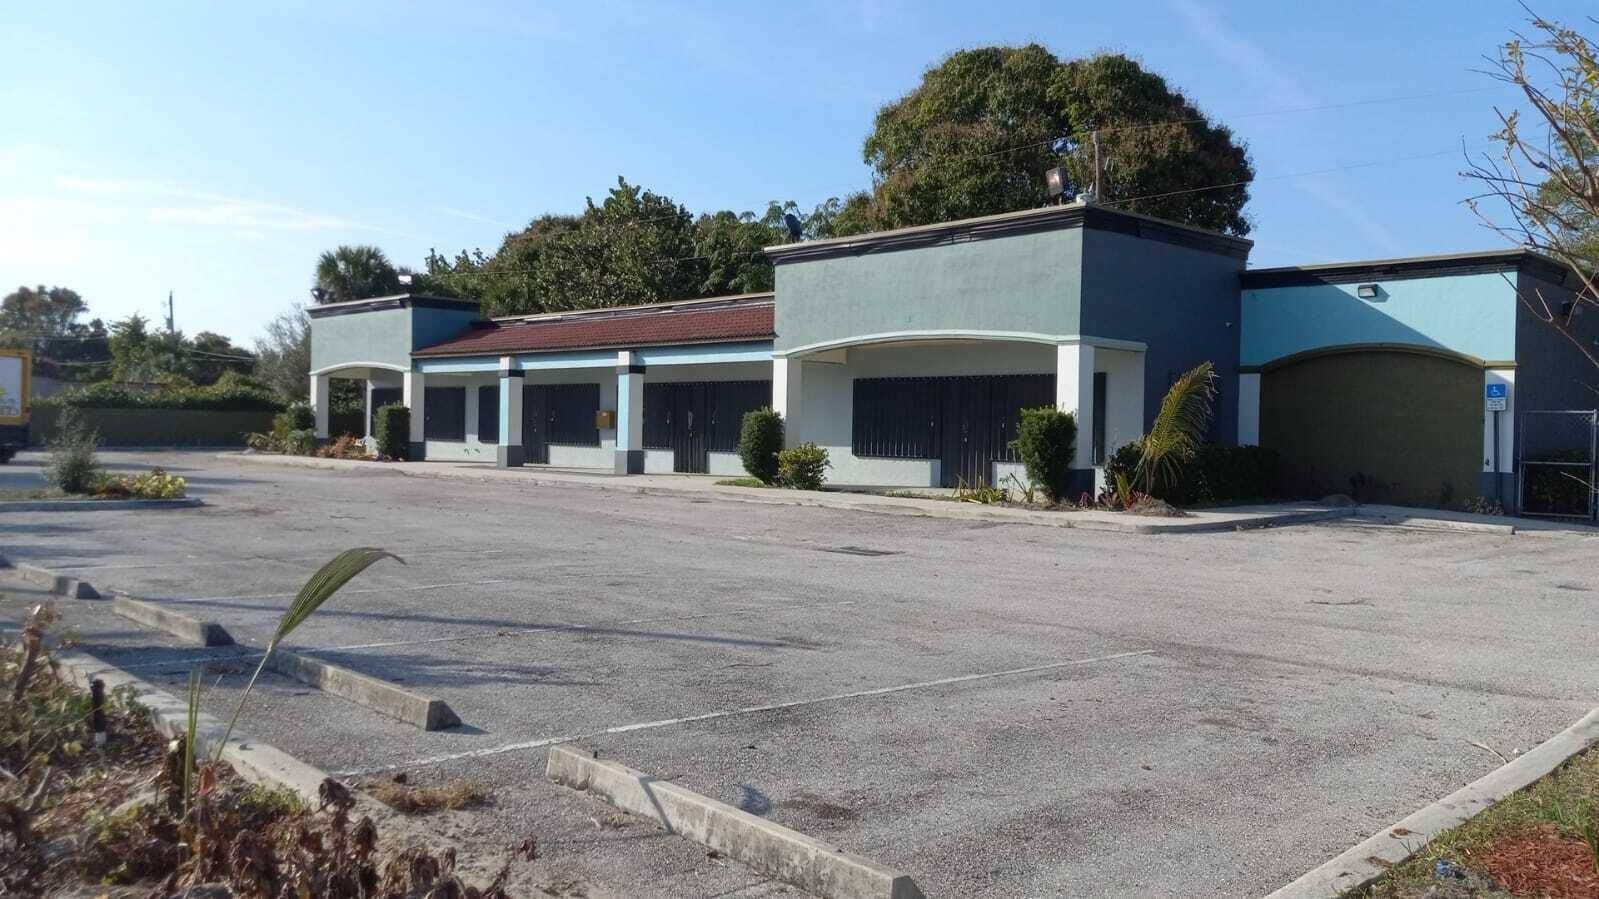 Get your grand opening at this strategically placed 4 unit commercial property in Riviera Beach.